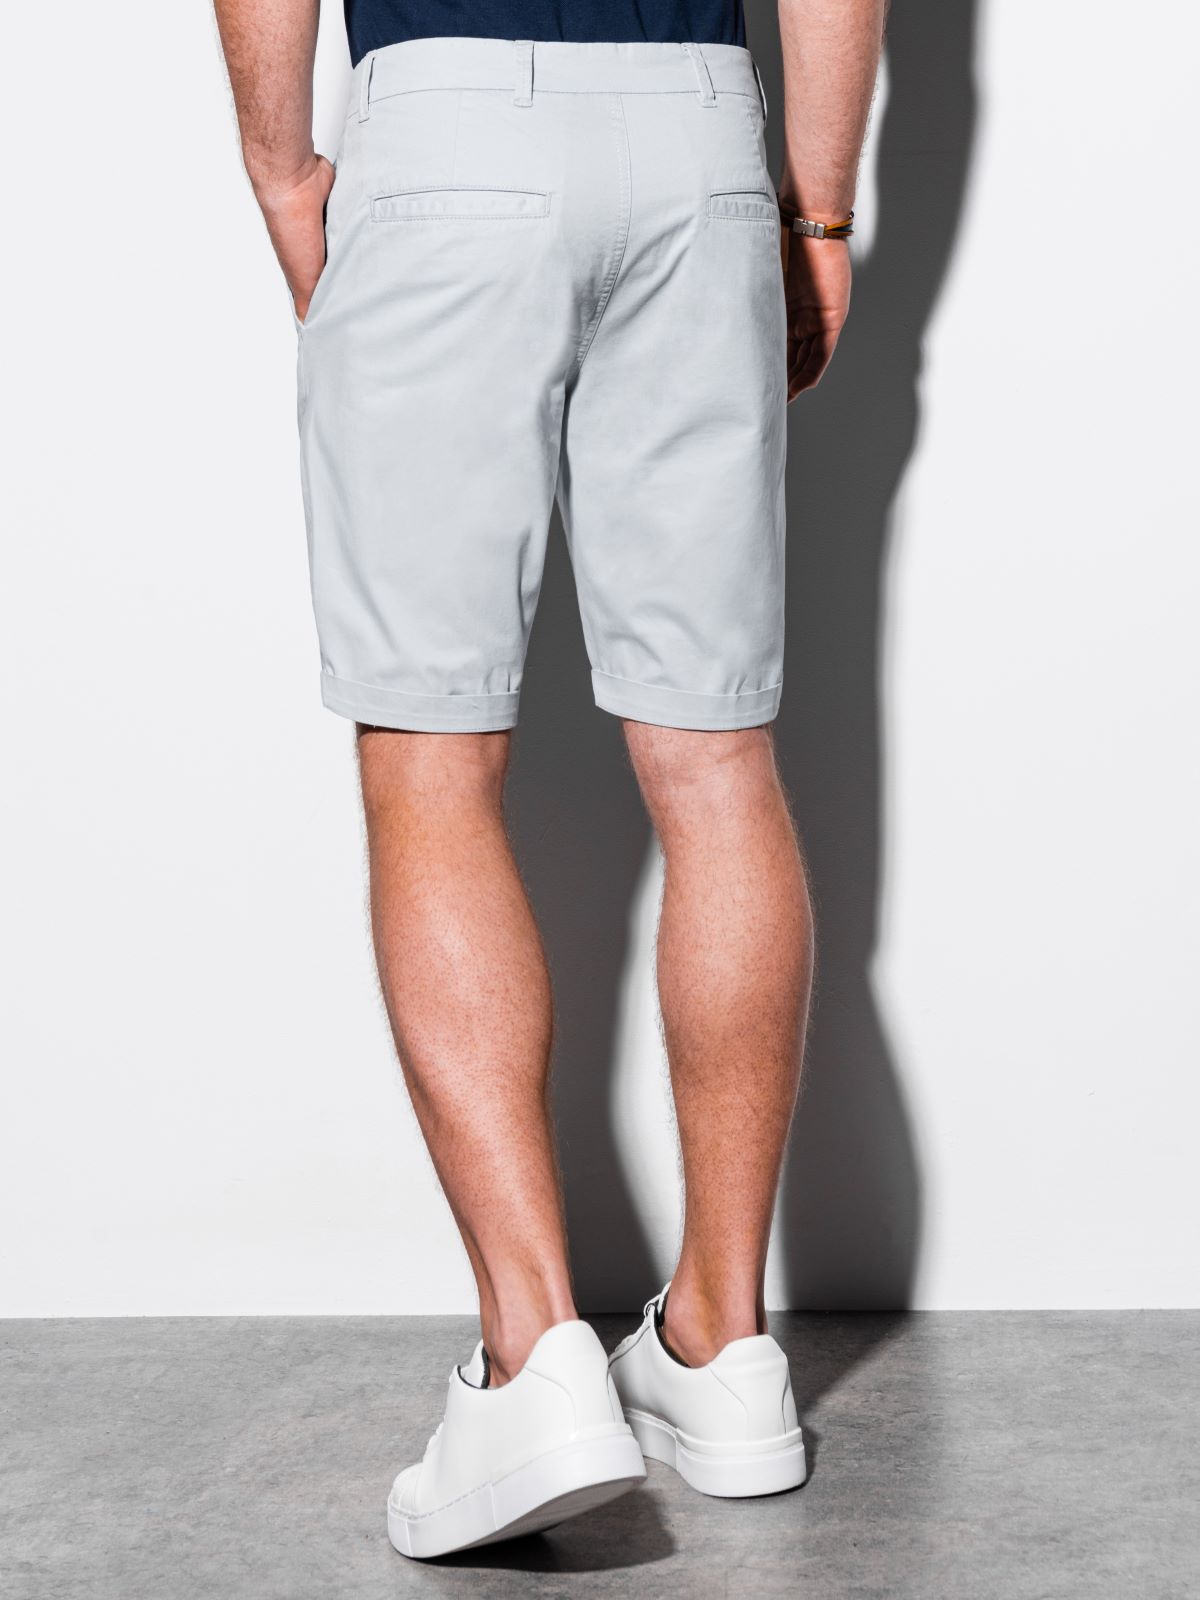 Men's casual shorts W243 - light grey | MODONE wholesale - Clothing For Men